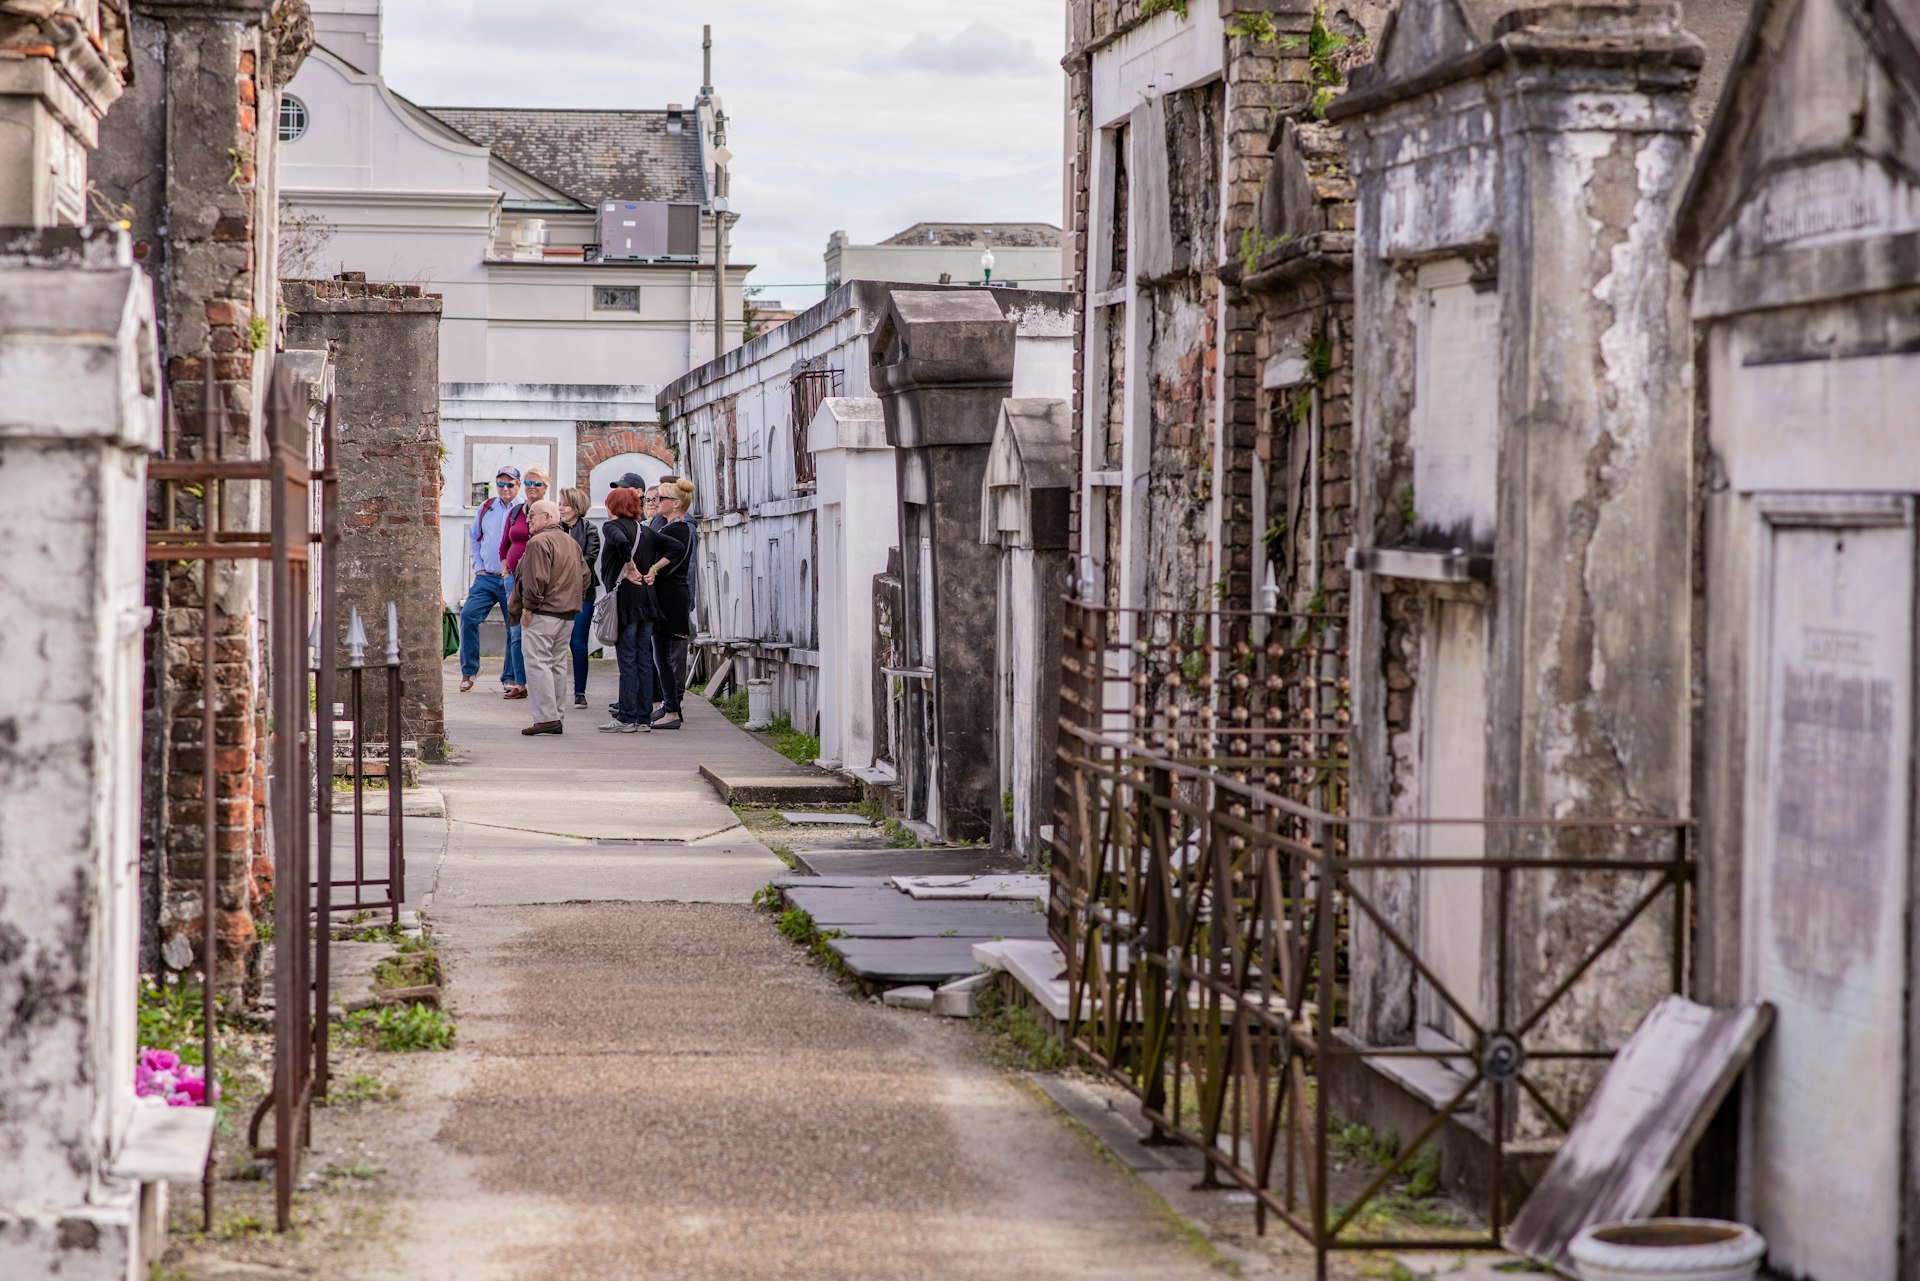 People take a guided tour of the above-ground graves in the St Louis Cemetery No 1, New Orleans, Louisiana, USA